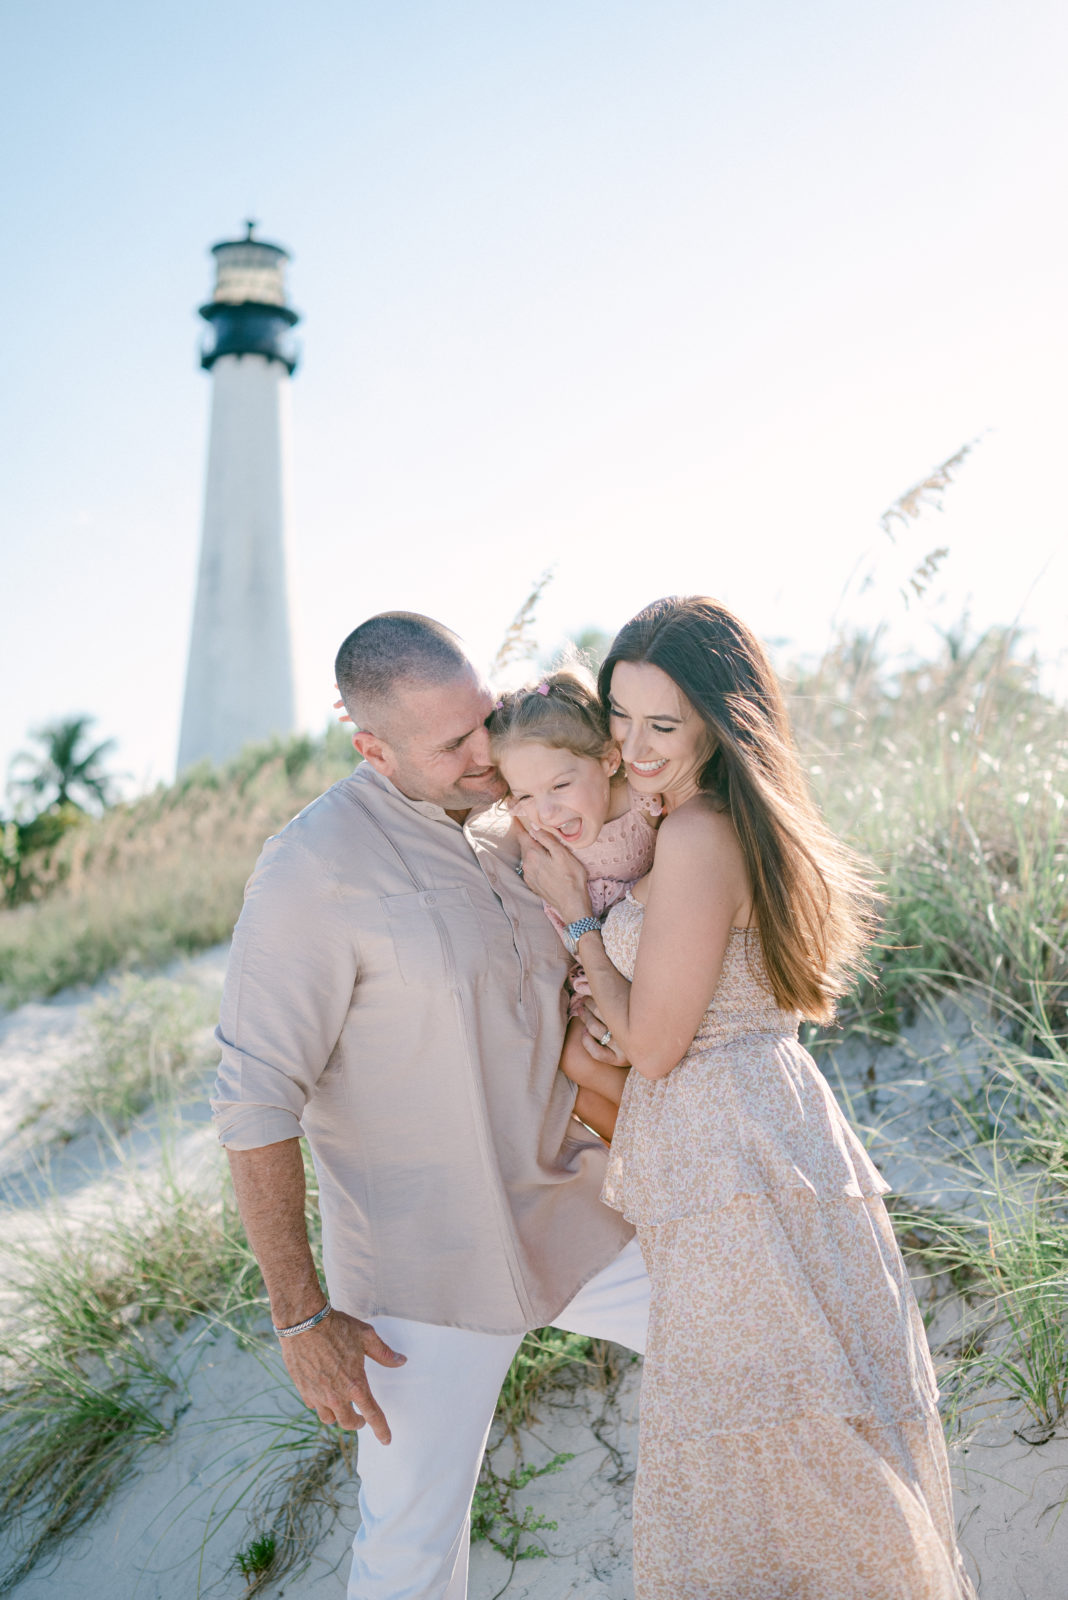 Family of three laughing together at the lighthouse beach in Key Biscayne